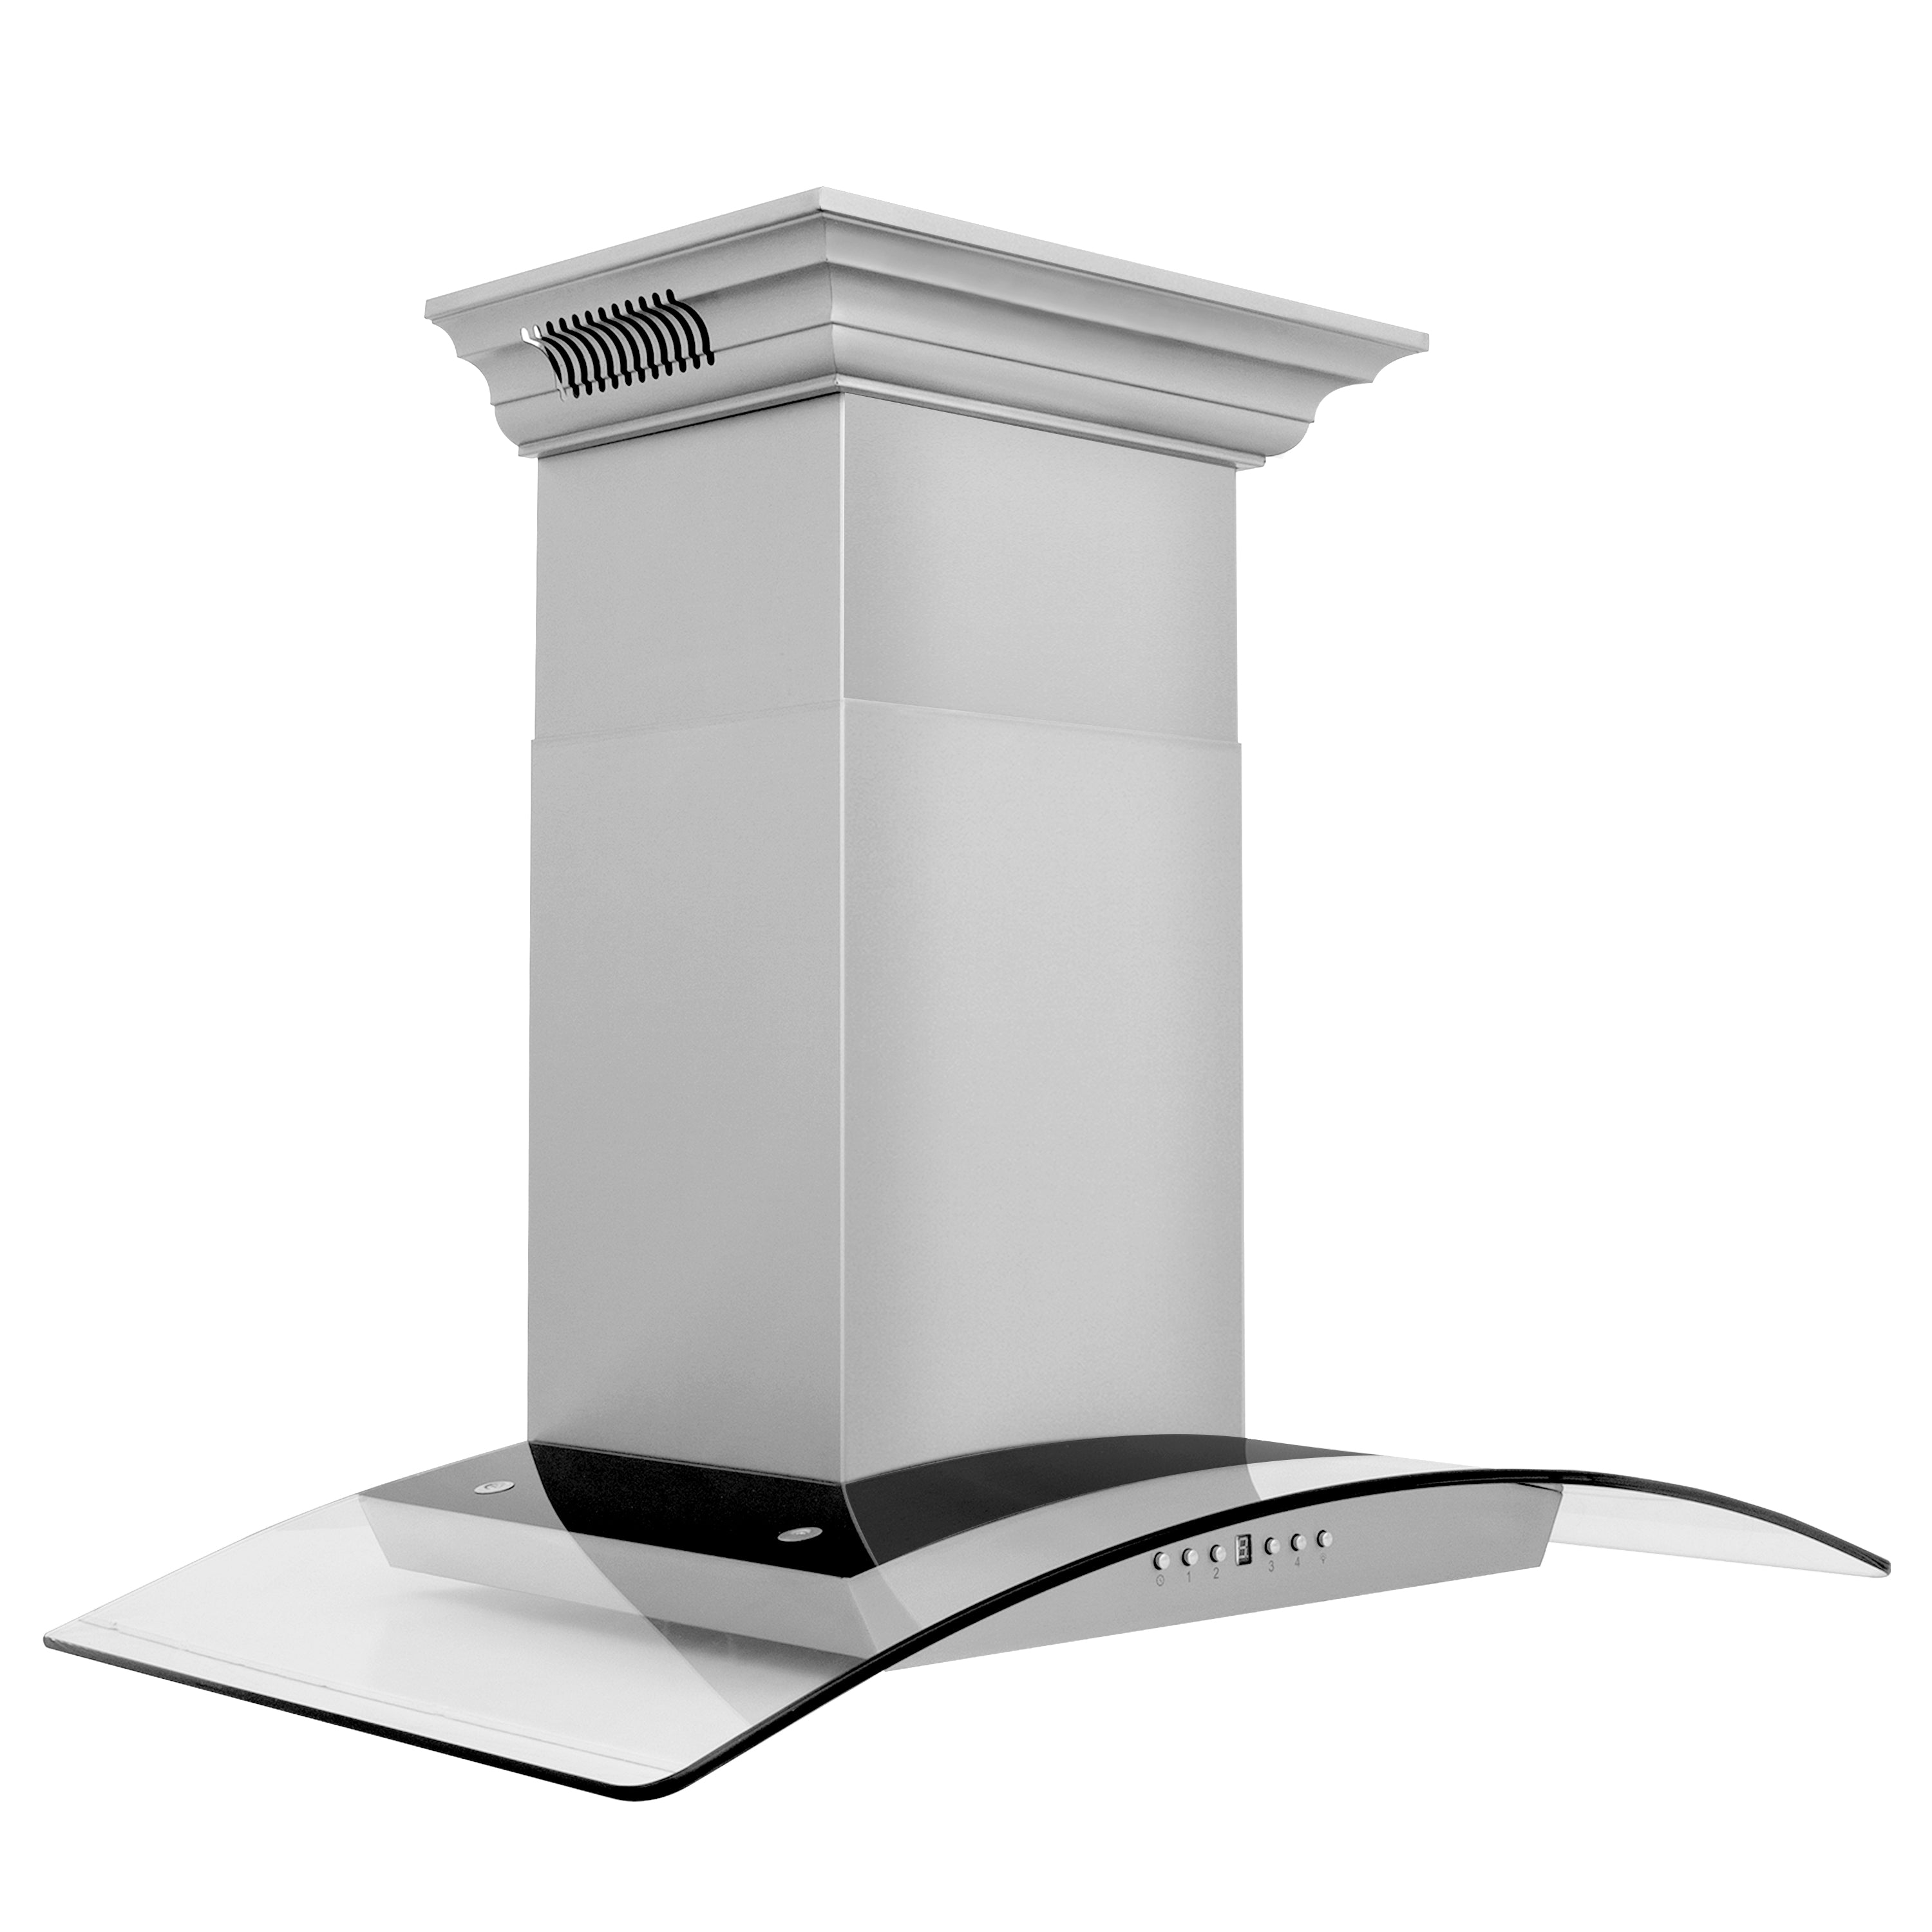 36" ZLINE CrownSound‚ Ducted Vent Wall Mount Range Hood in Stainless Steel with Built-in Bluetooth Speakers (KZCRN-BT-36)